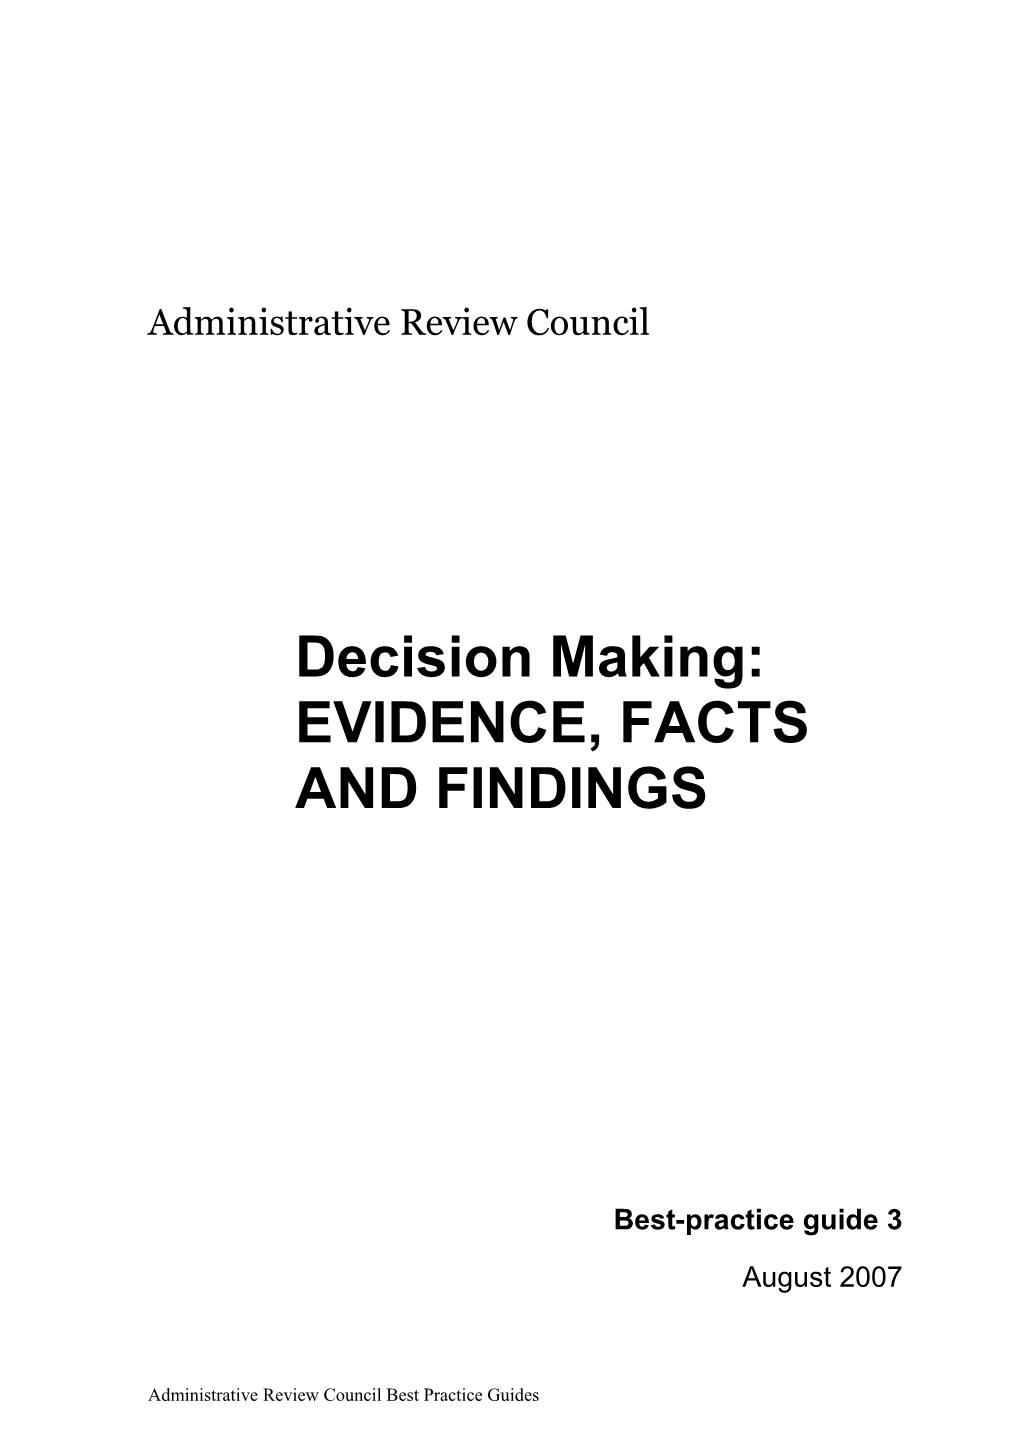 Decision Making: EVIDENCE, FACTS and FINDINGS